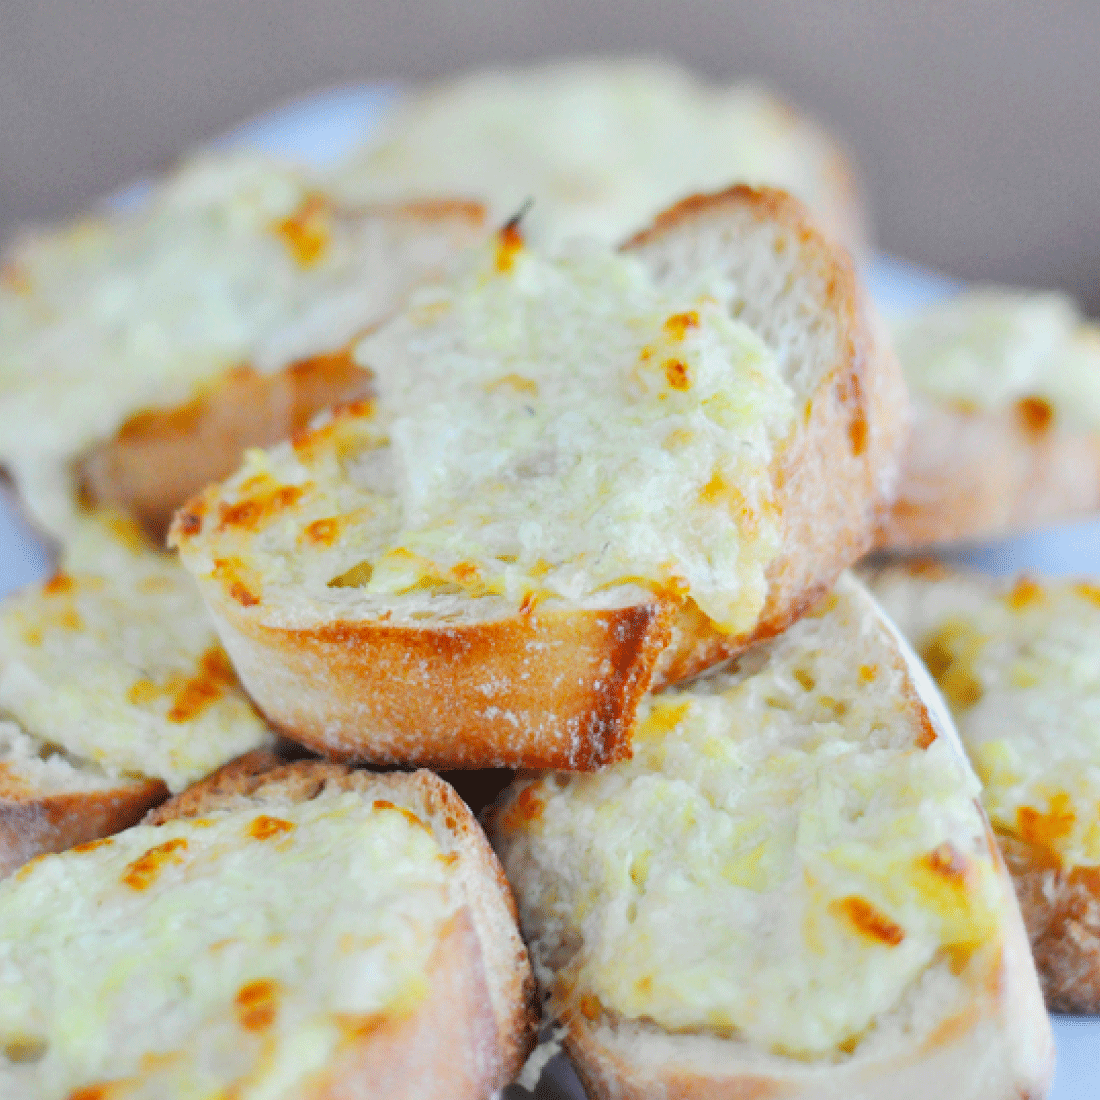 Appetizer Recipes - a round up of the very best. Featuring cheesy bread